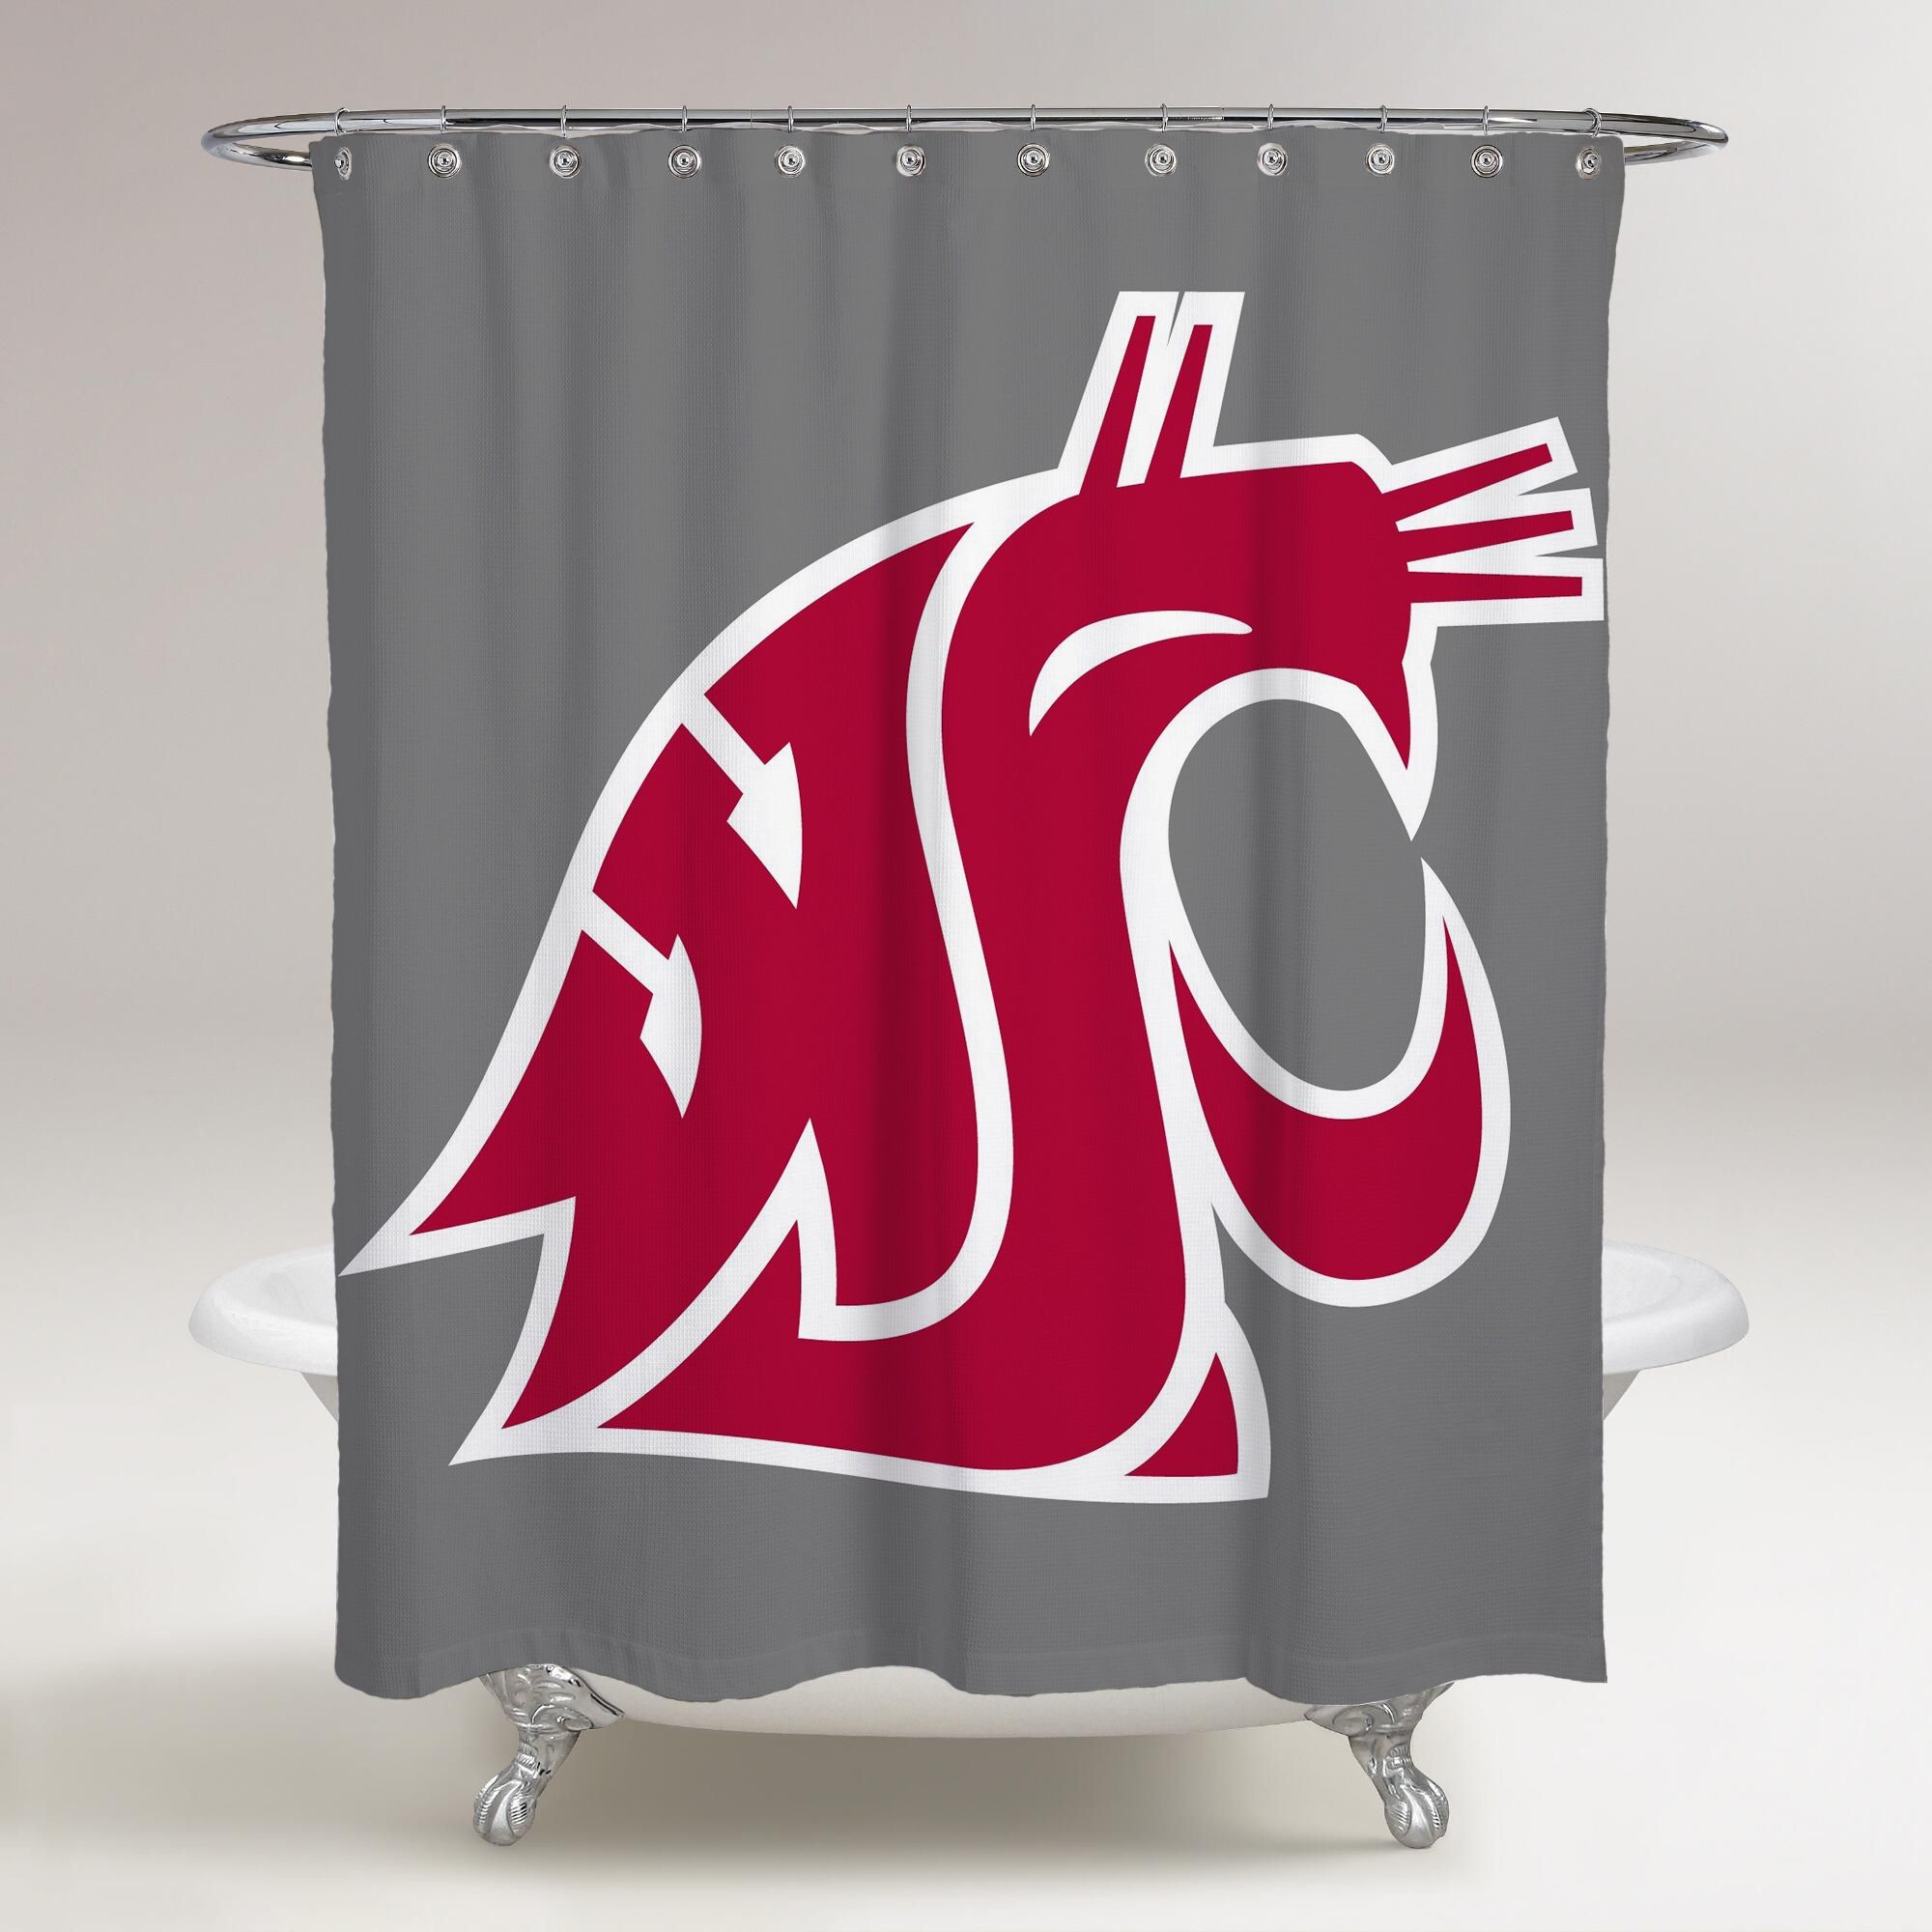 2000x2000 WASHINGTON STATE COUGARS LOGO WALLPAPER COLLAGE FOOTBALL NCAA UNIQUE SHOWER  CURTAIN Price: 50.00 & FREE Shipping #printedgifts